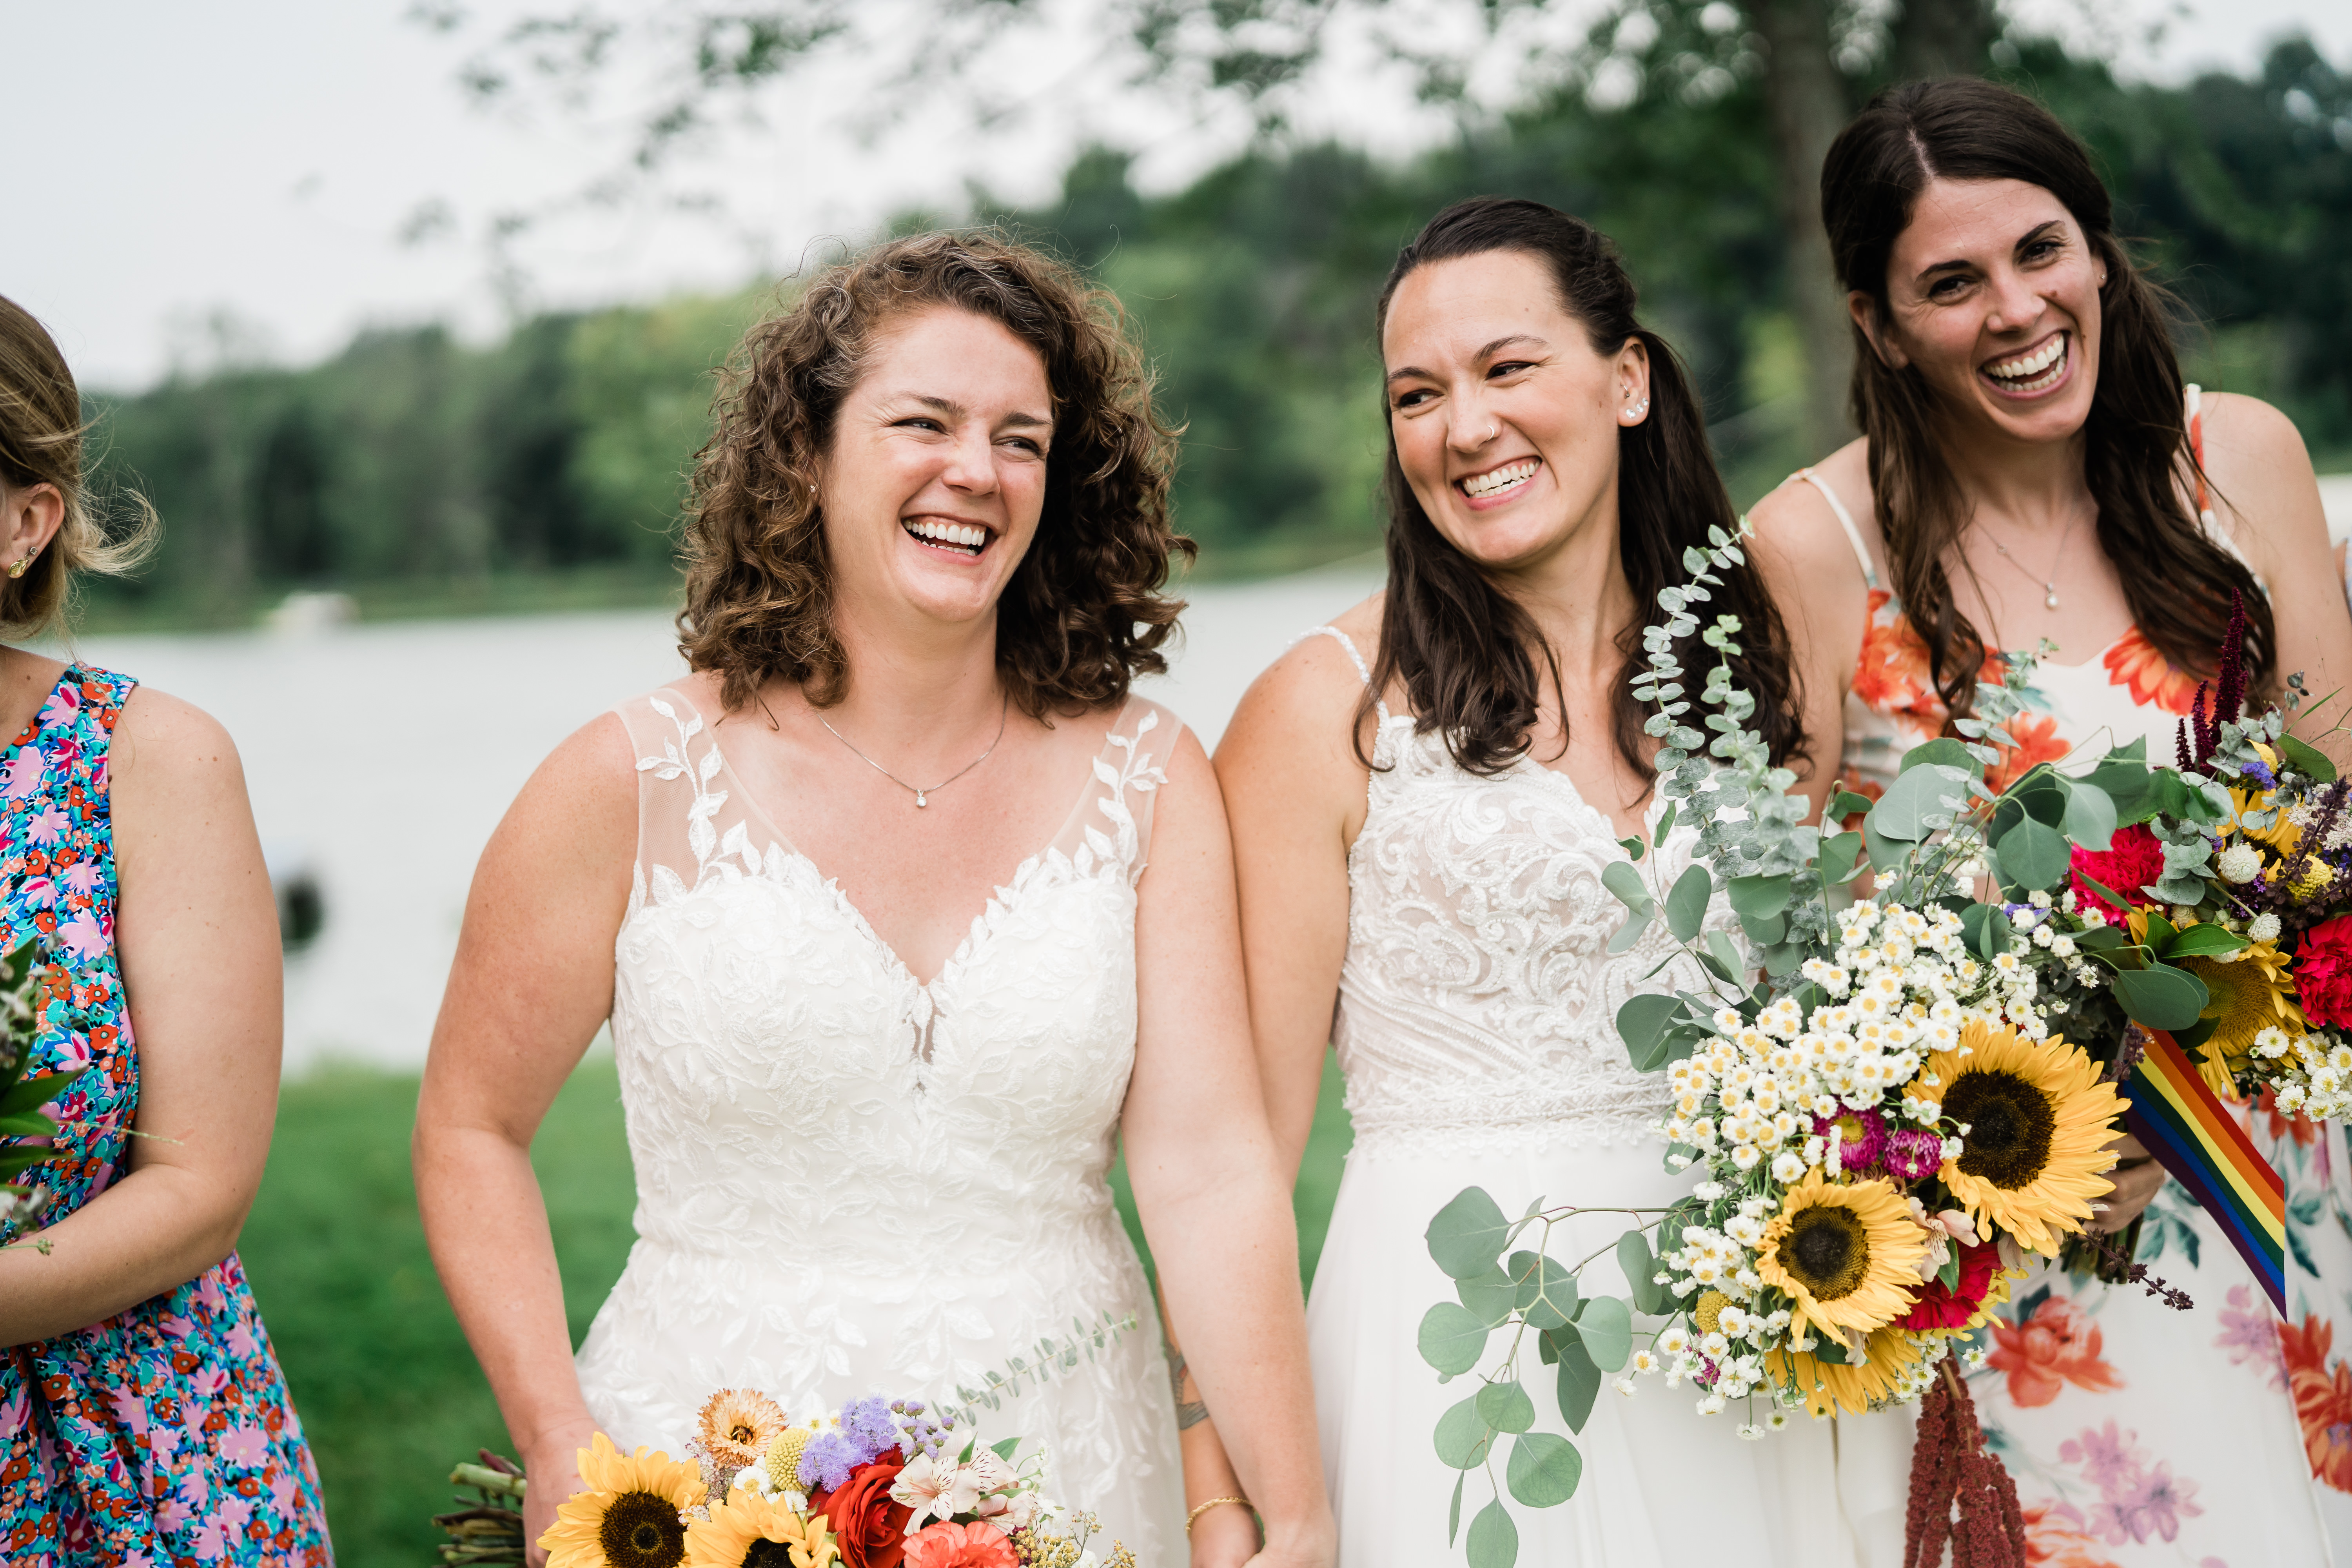 brides holding hands and laughing together